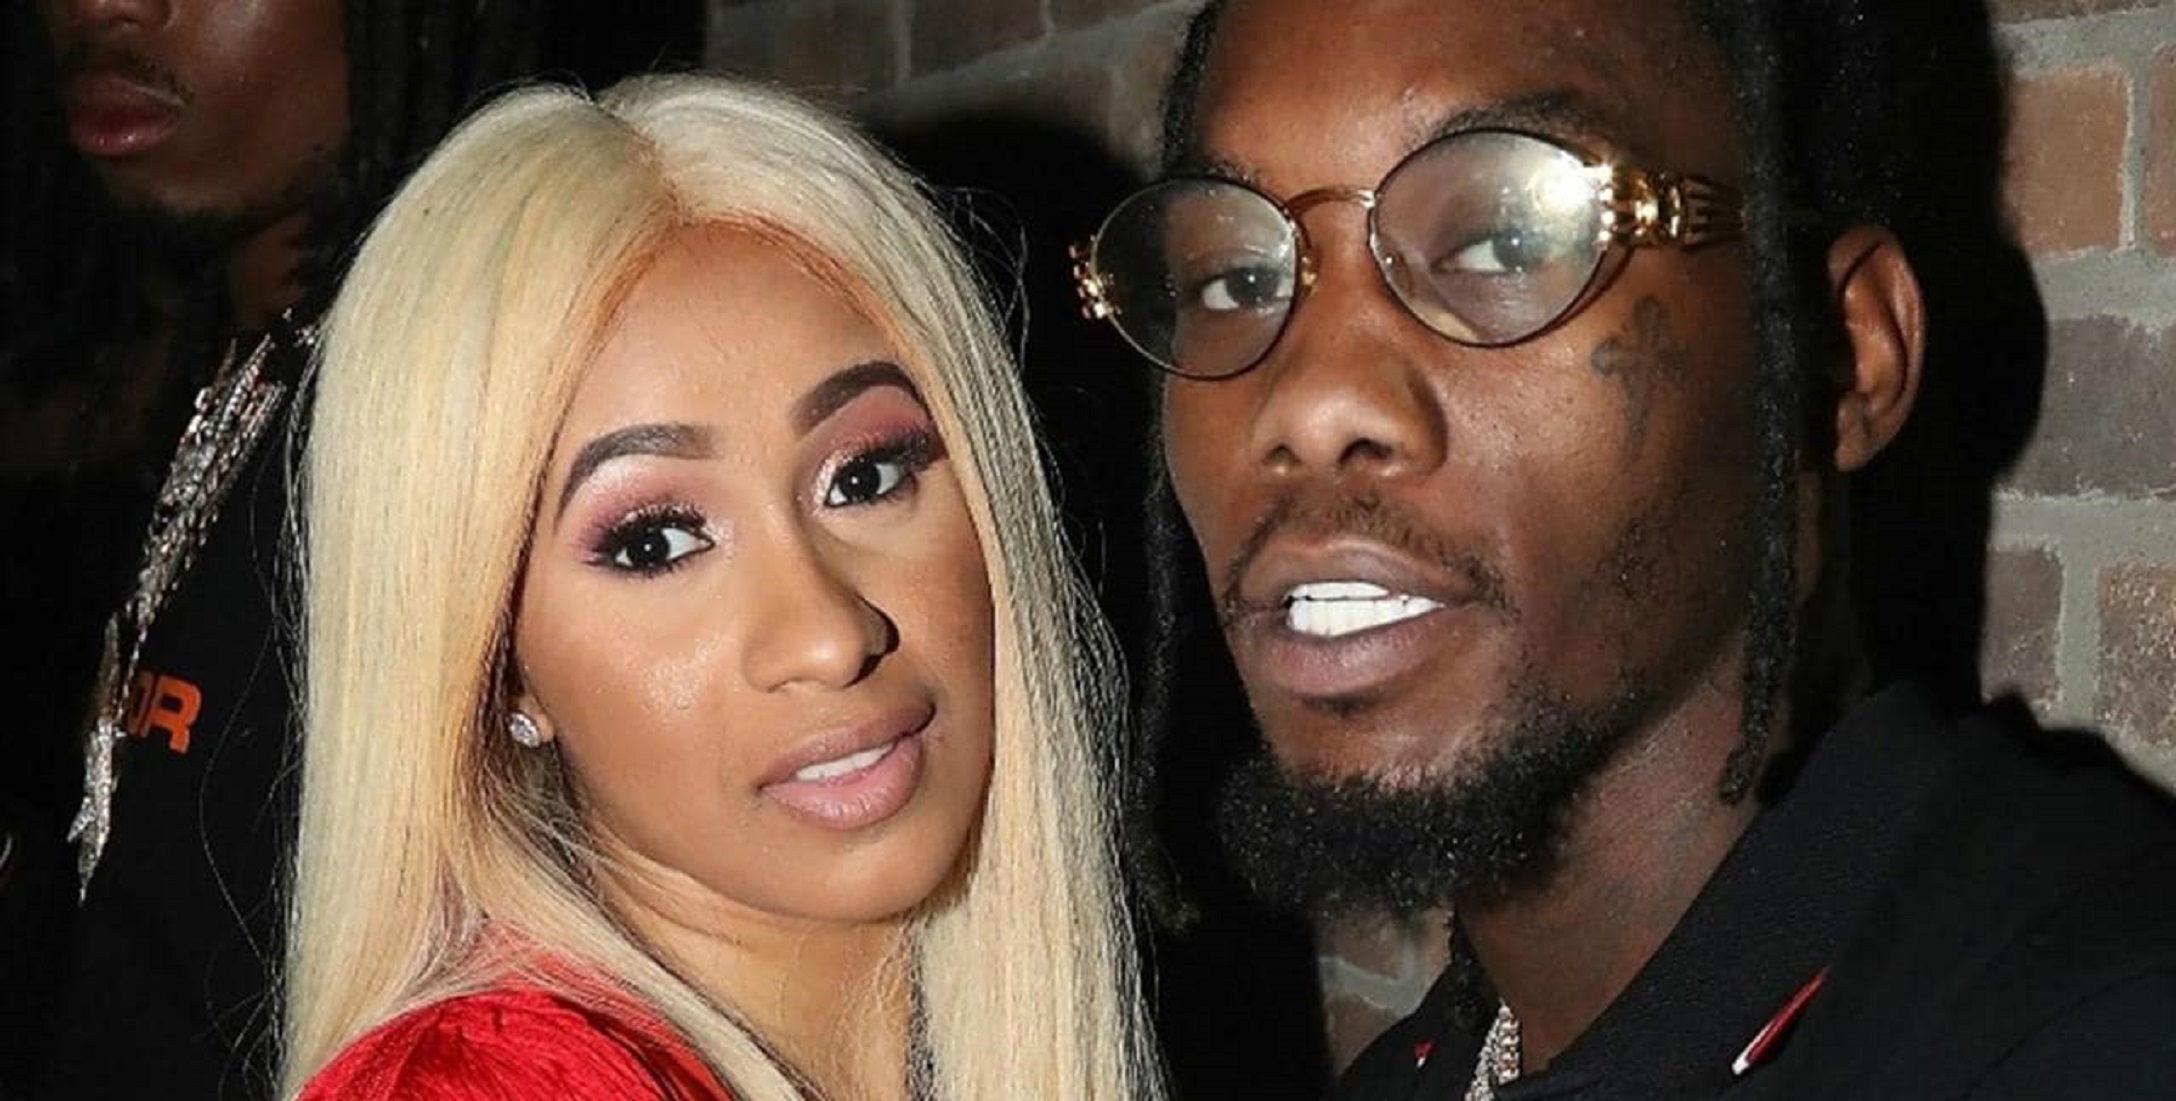 Cardi B Says She Took Offset Back as She Wanted Some “D*ck For Her Birthday”